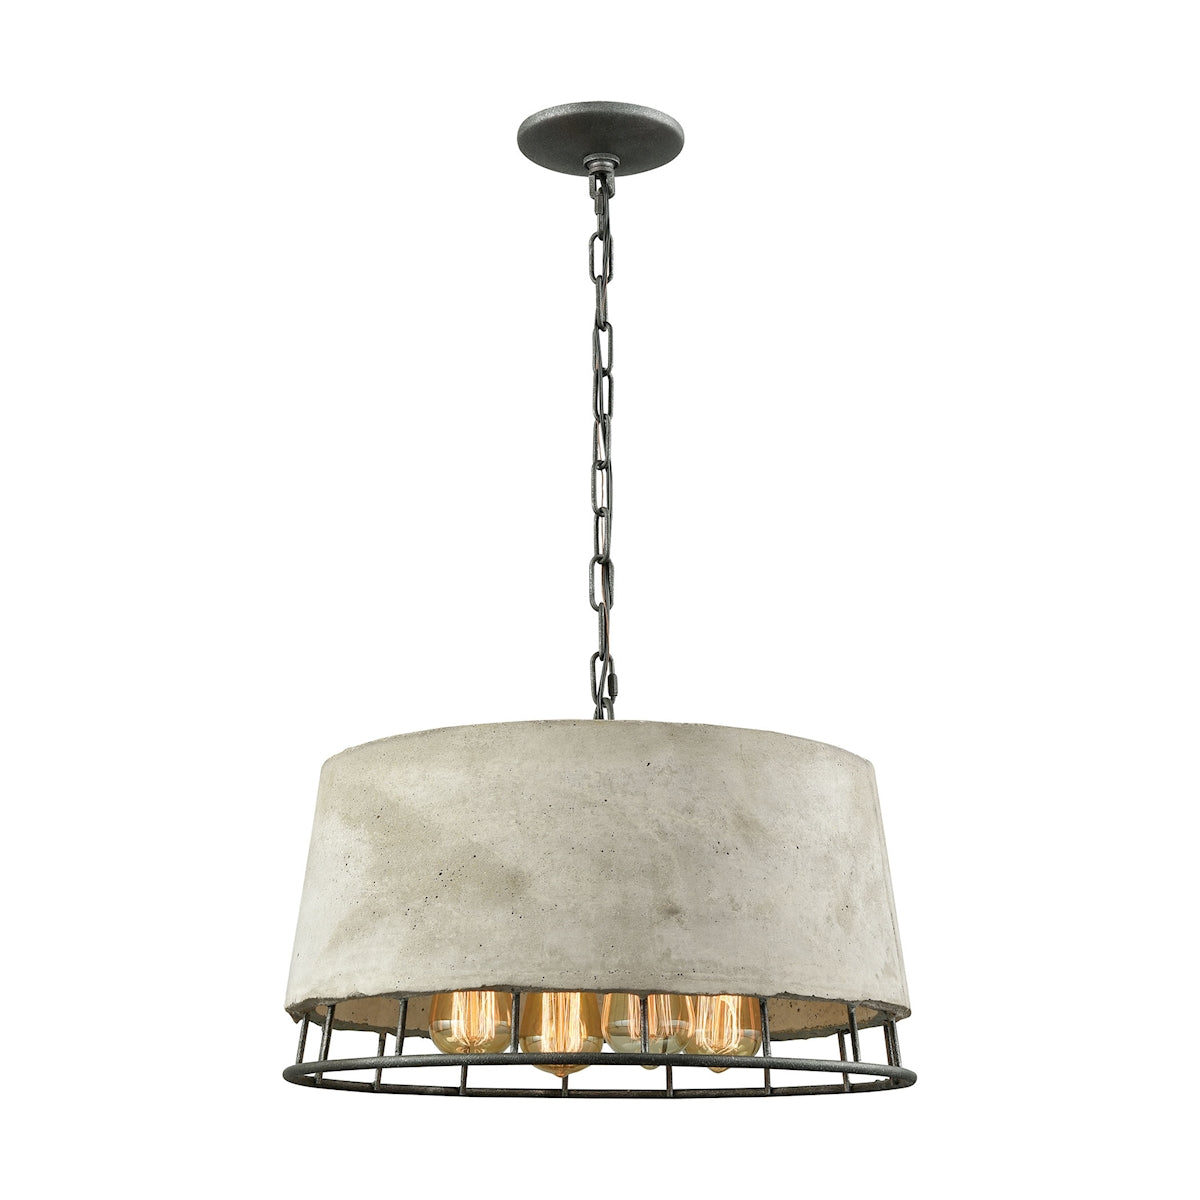 ELK Lighting 14319/4 Brocca 4-Light Chandelier in Silverdust Iron with Concrete and Metal Shade